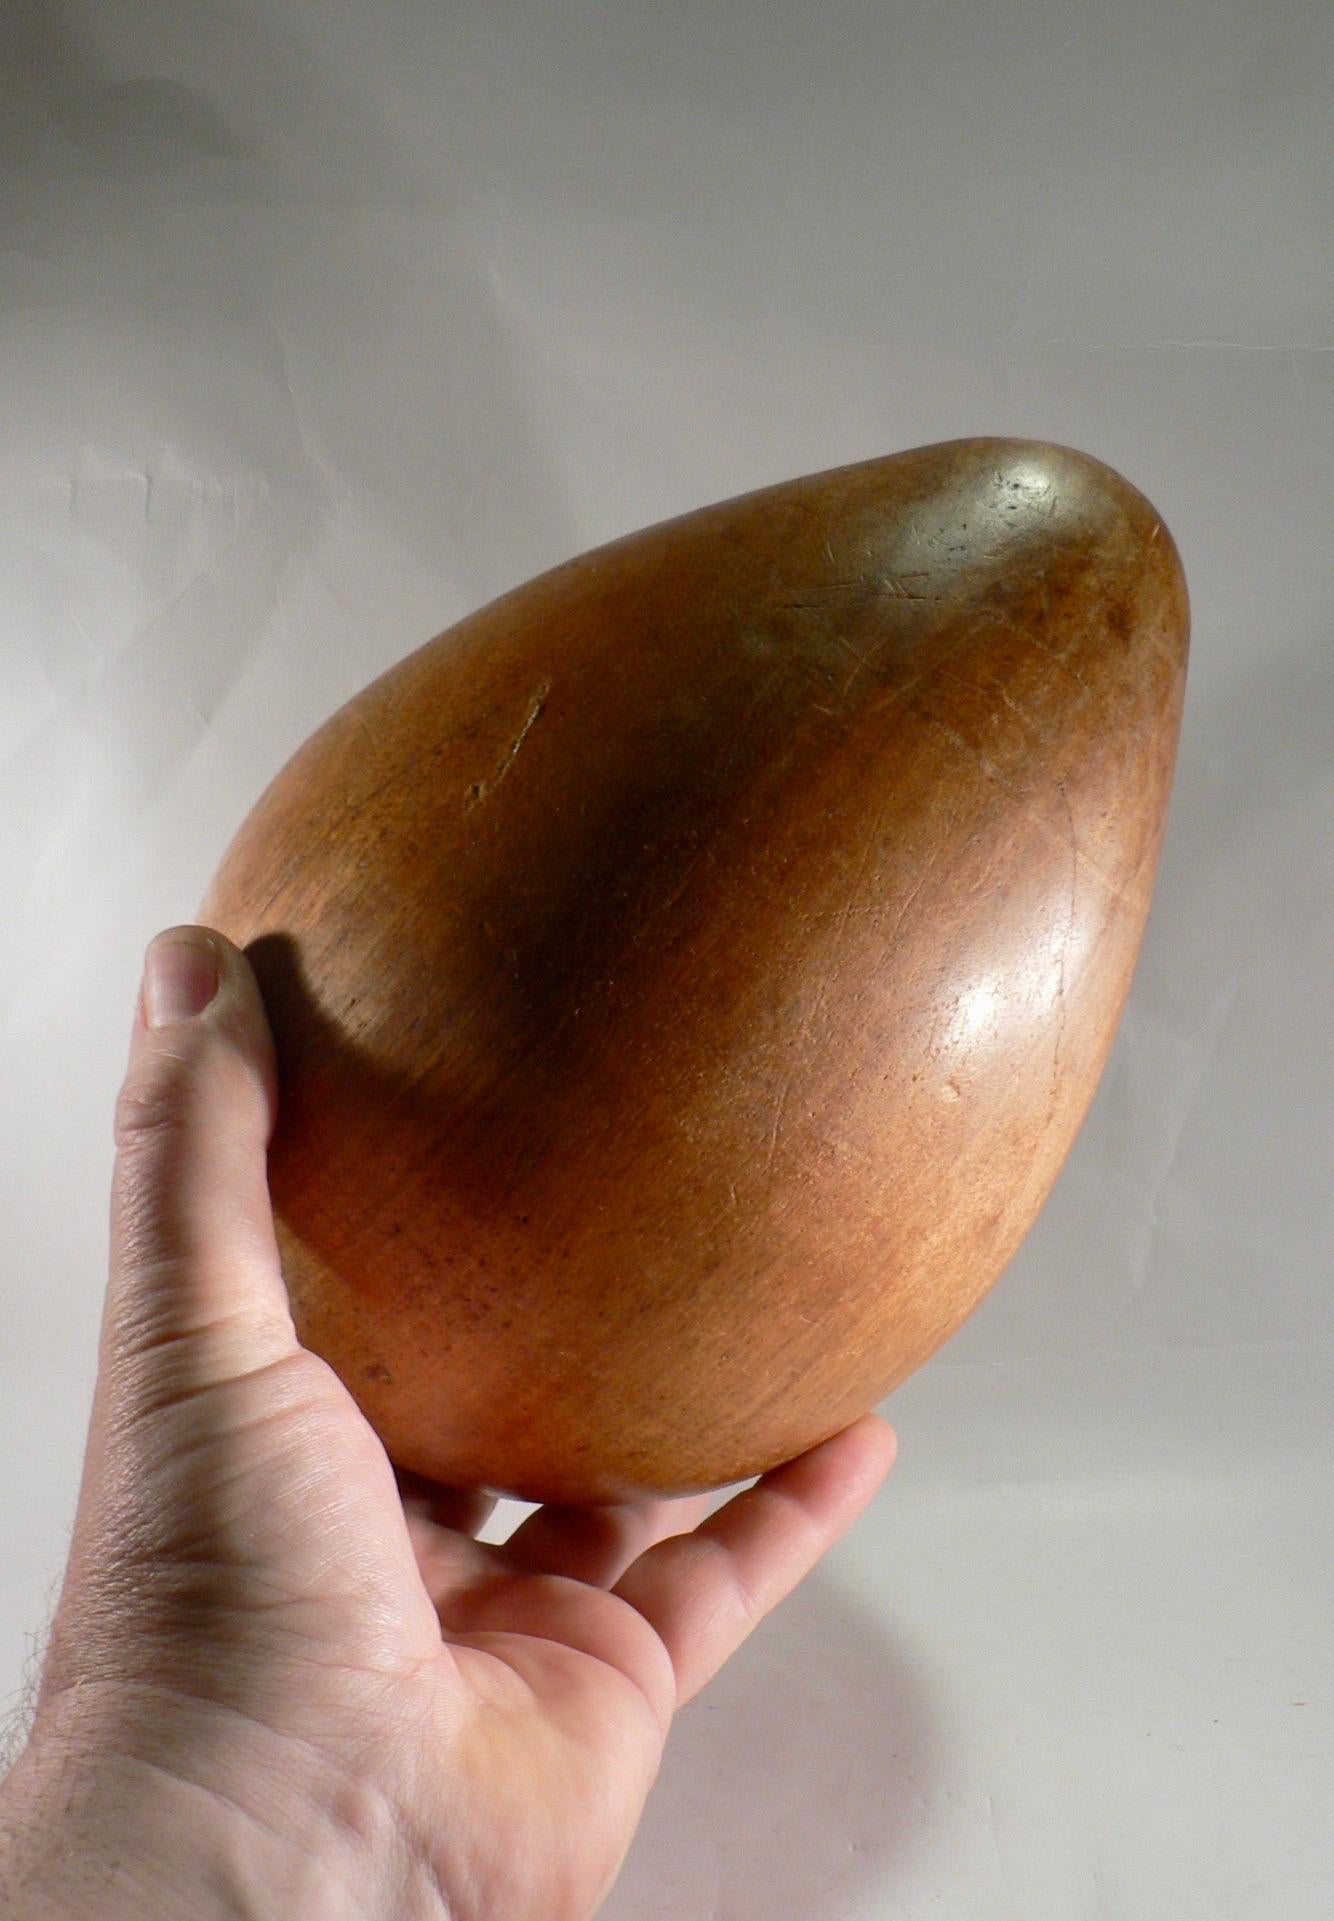 A carved wooden egg, likely made in the 1950s in France. This type of object was popular at the time and is often considered a beautiful decorative item. Carved eggs were often crafted by hand, typically turned on a lathe, resulting in a smooth and